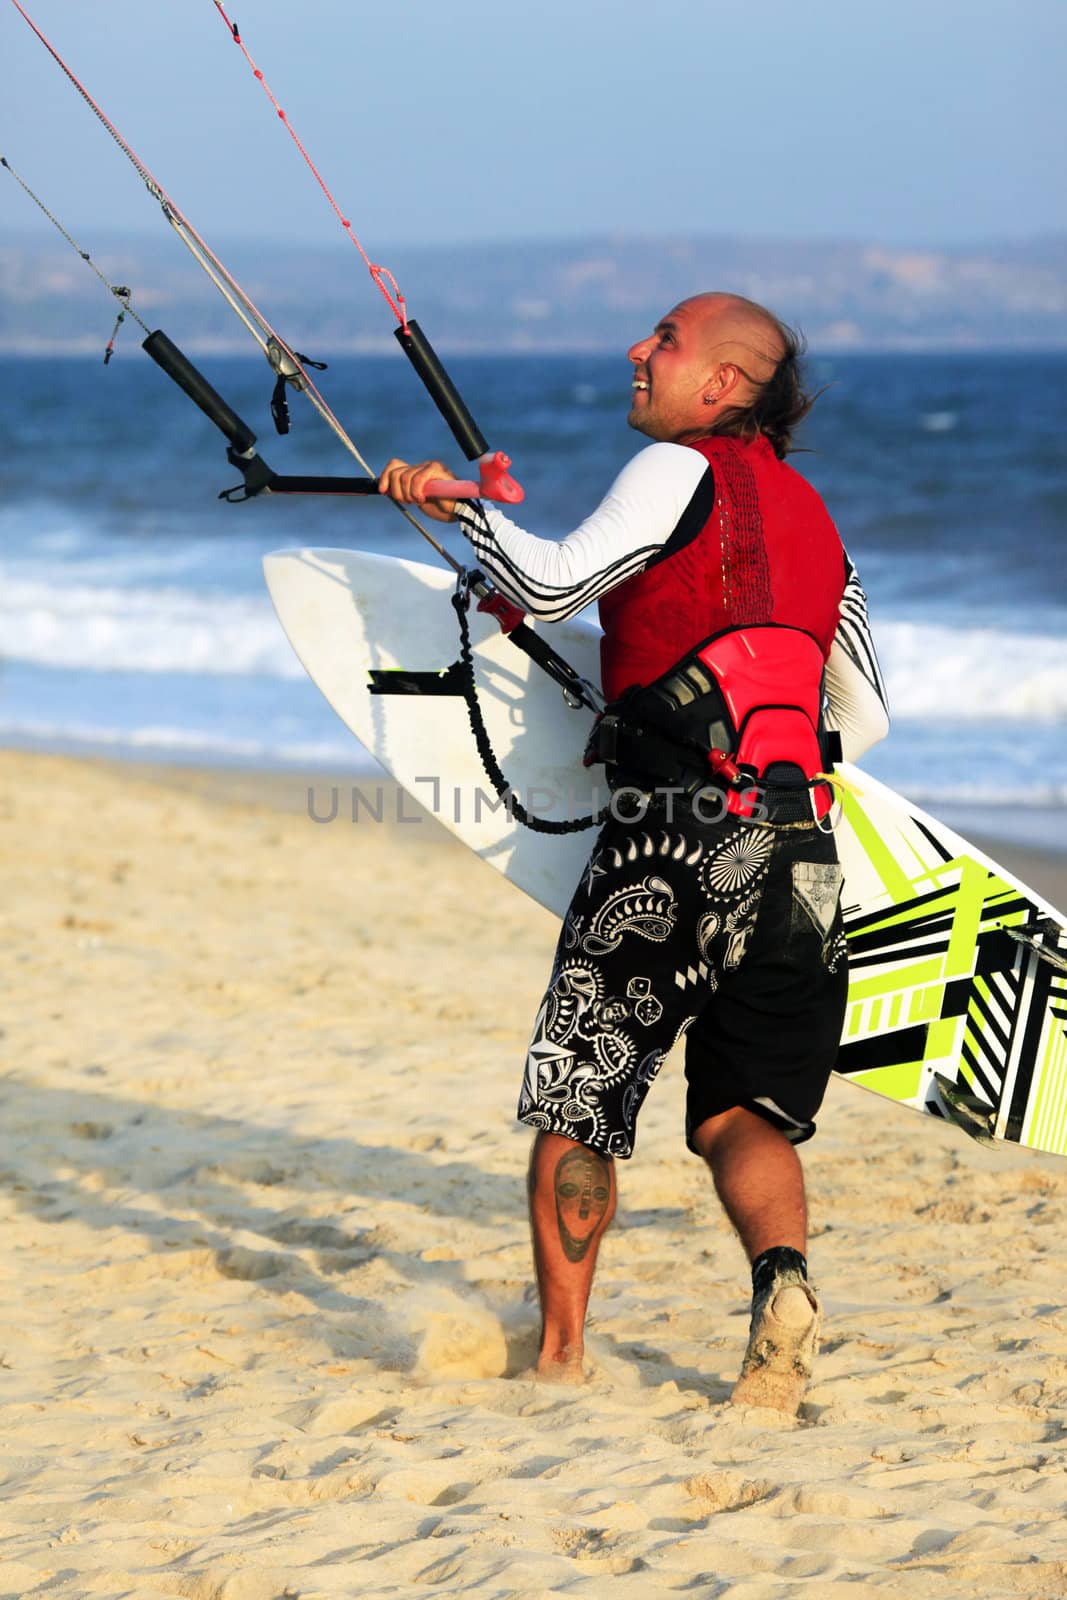 Kitesurfer with surferboard on the beach